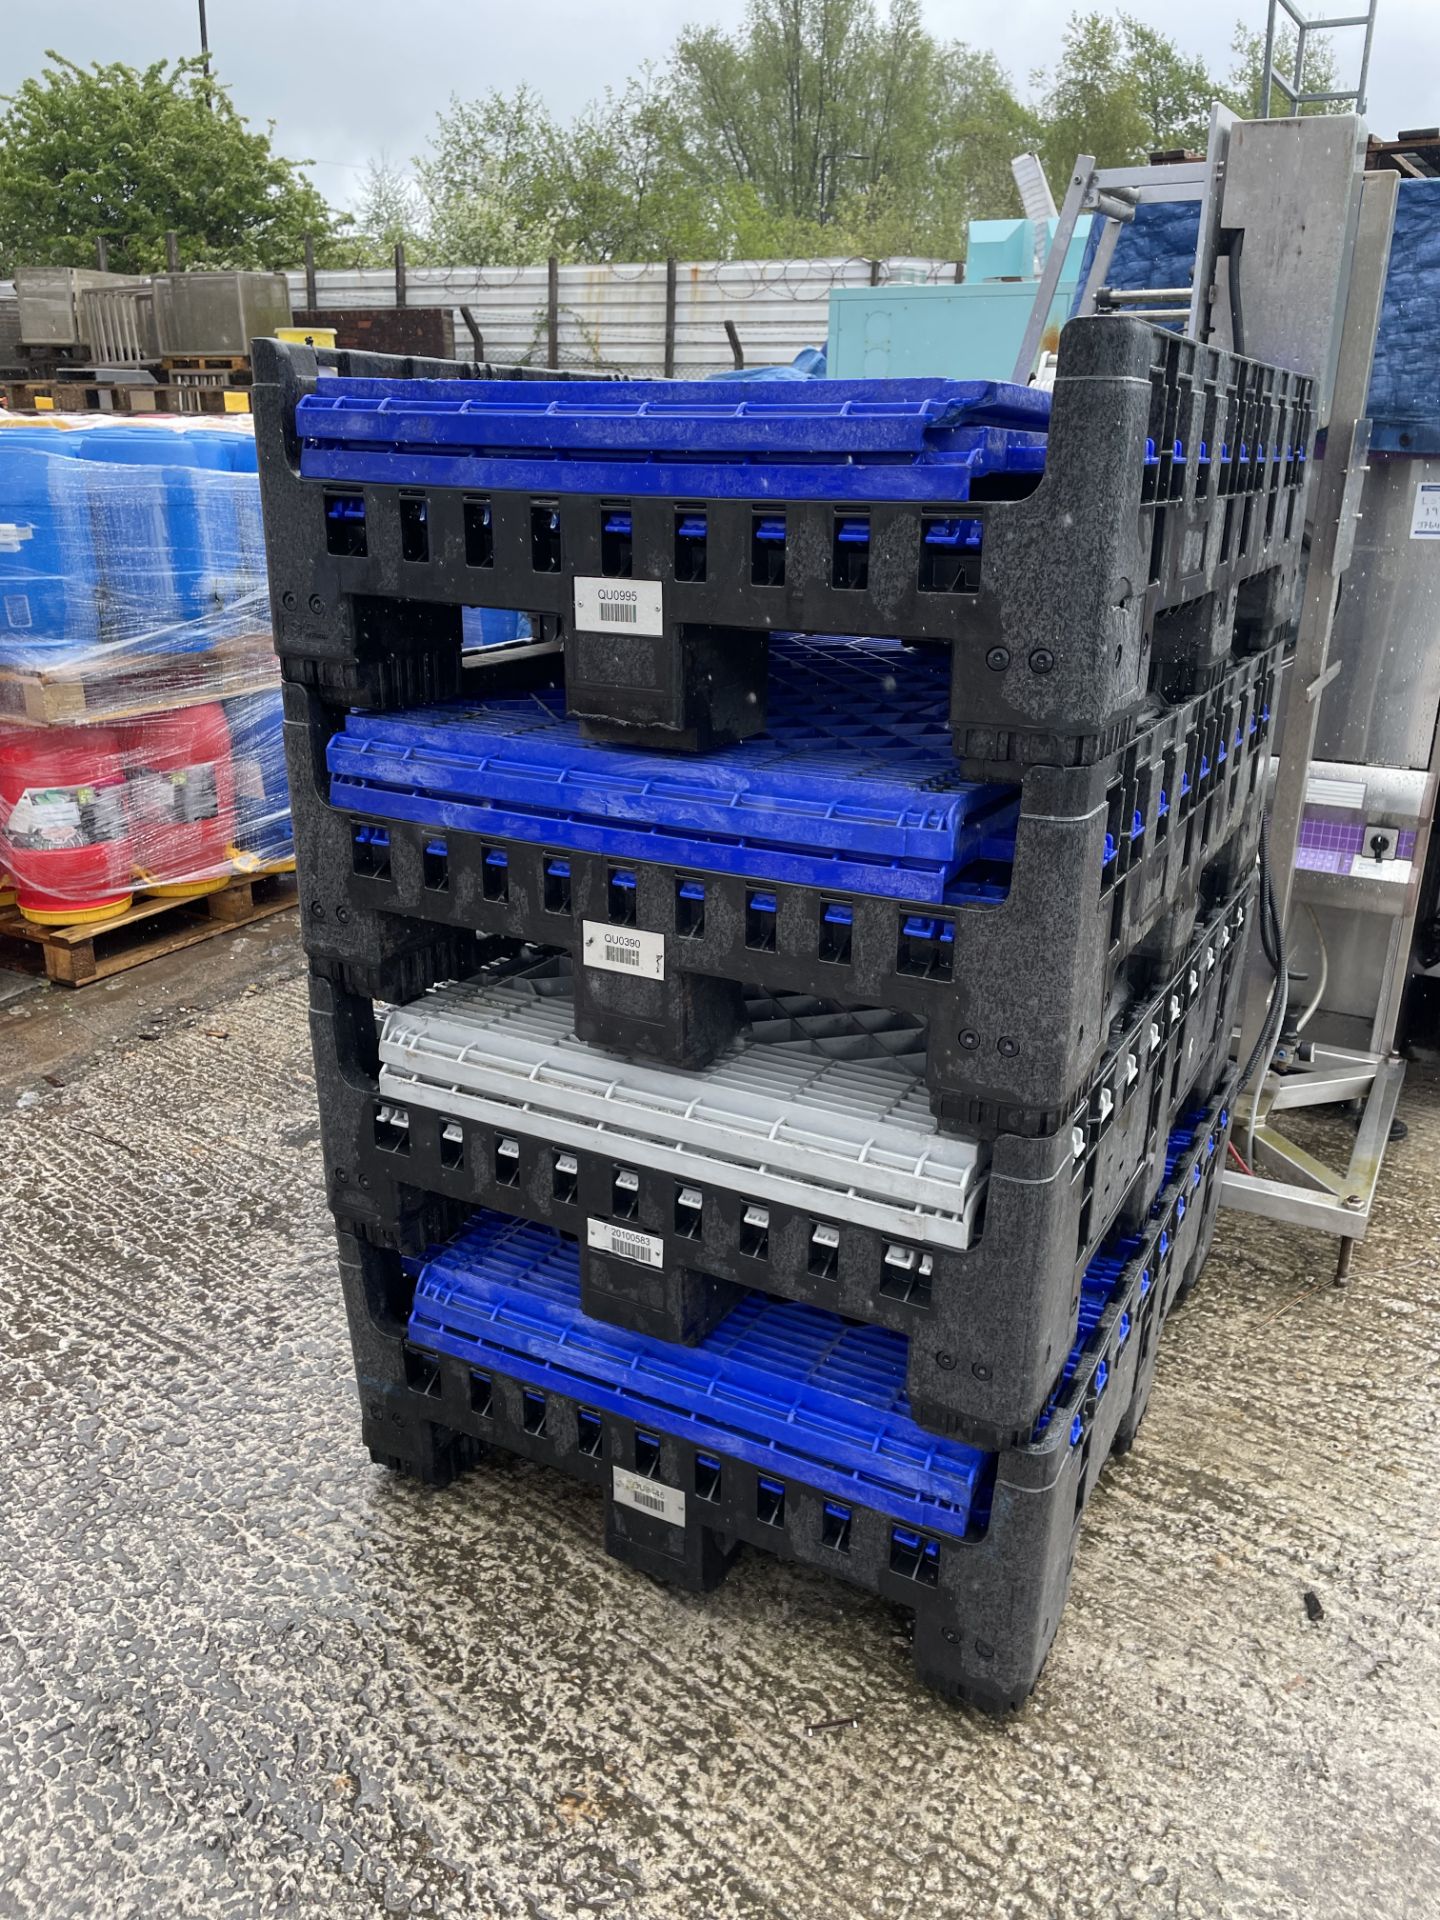 Four Collapsible Plastic Crates, each approx. 1.15